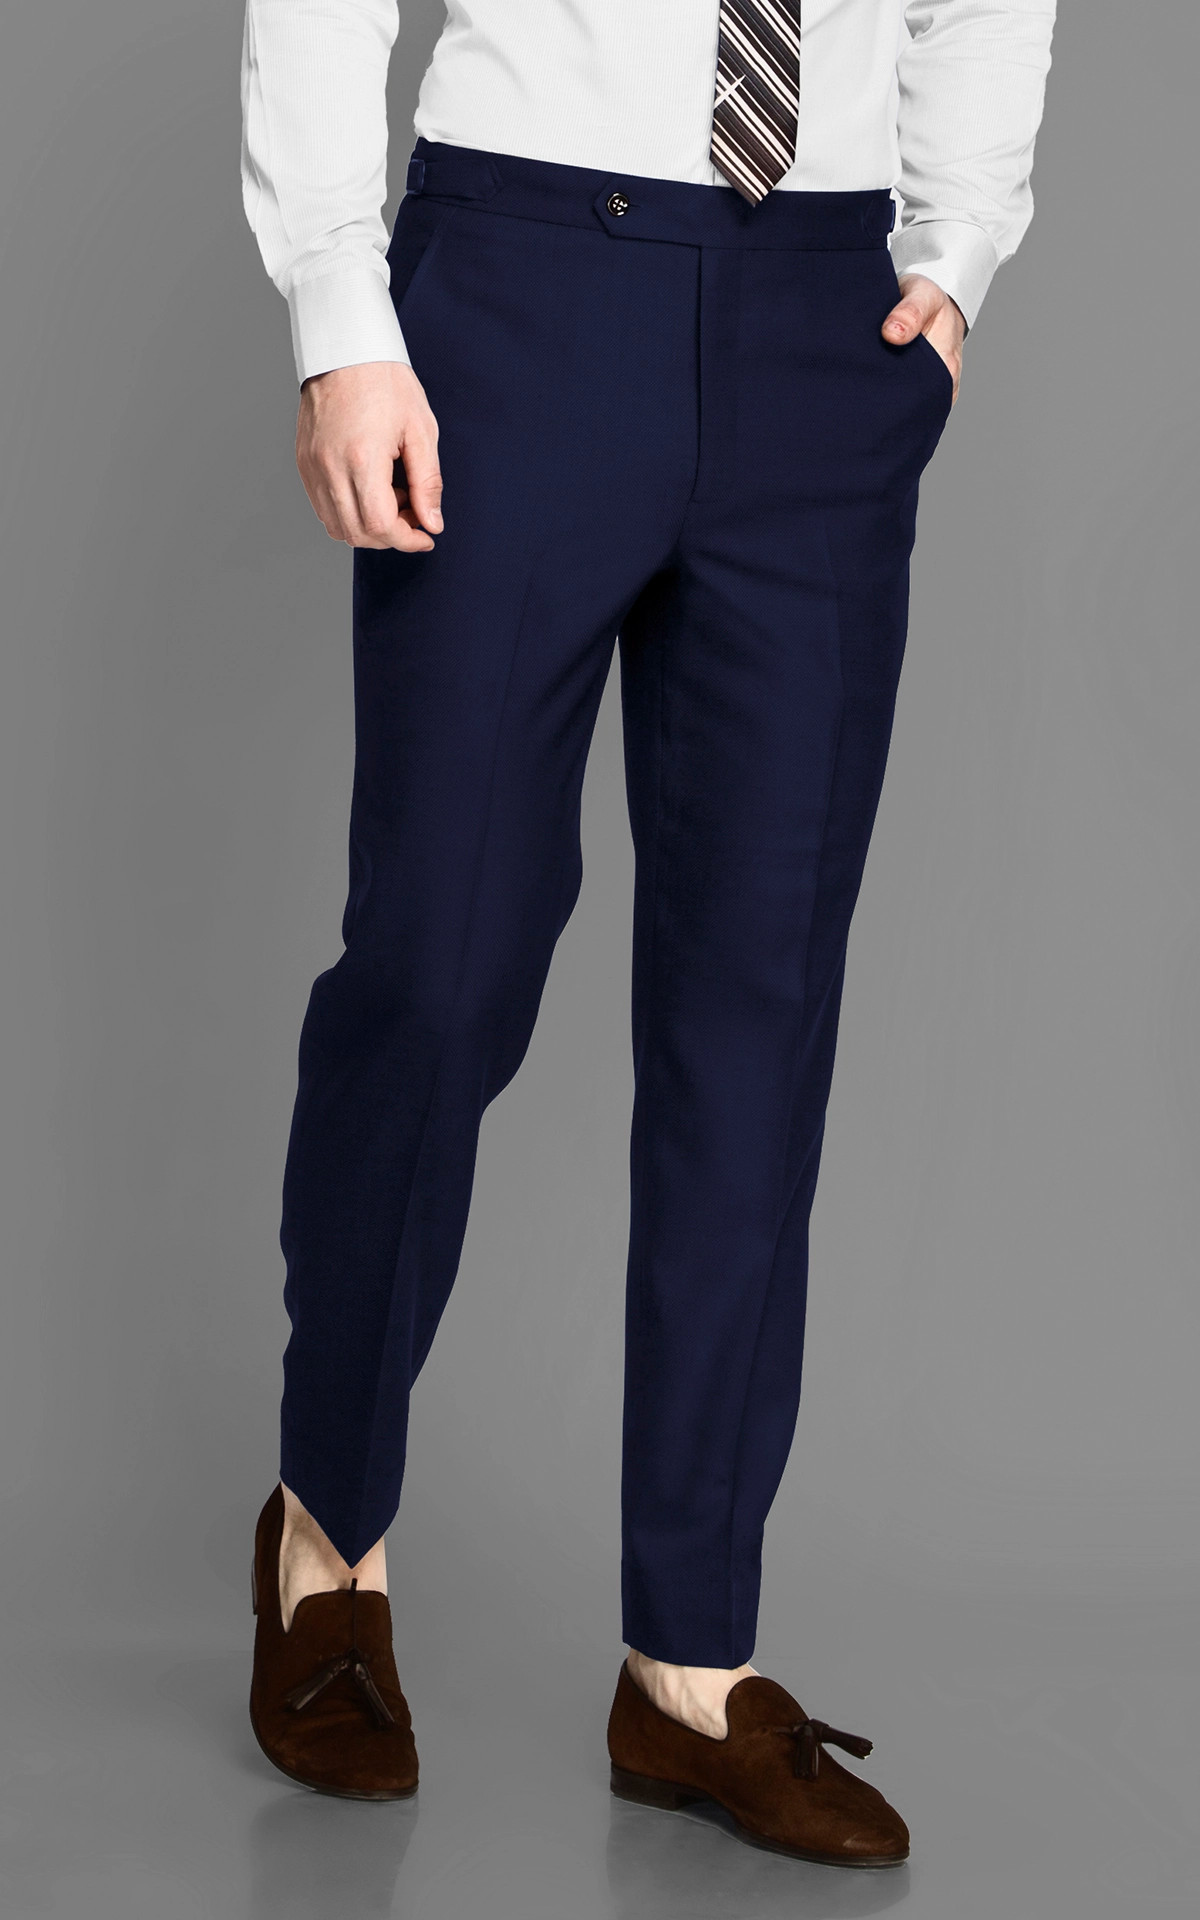 Buy INVICTUS Men Navy Blue Slim Fit Formal Trousers - Trousers for Men  1117222 | Myntra